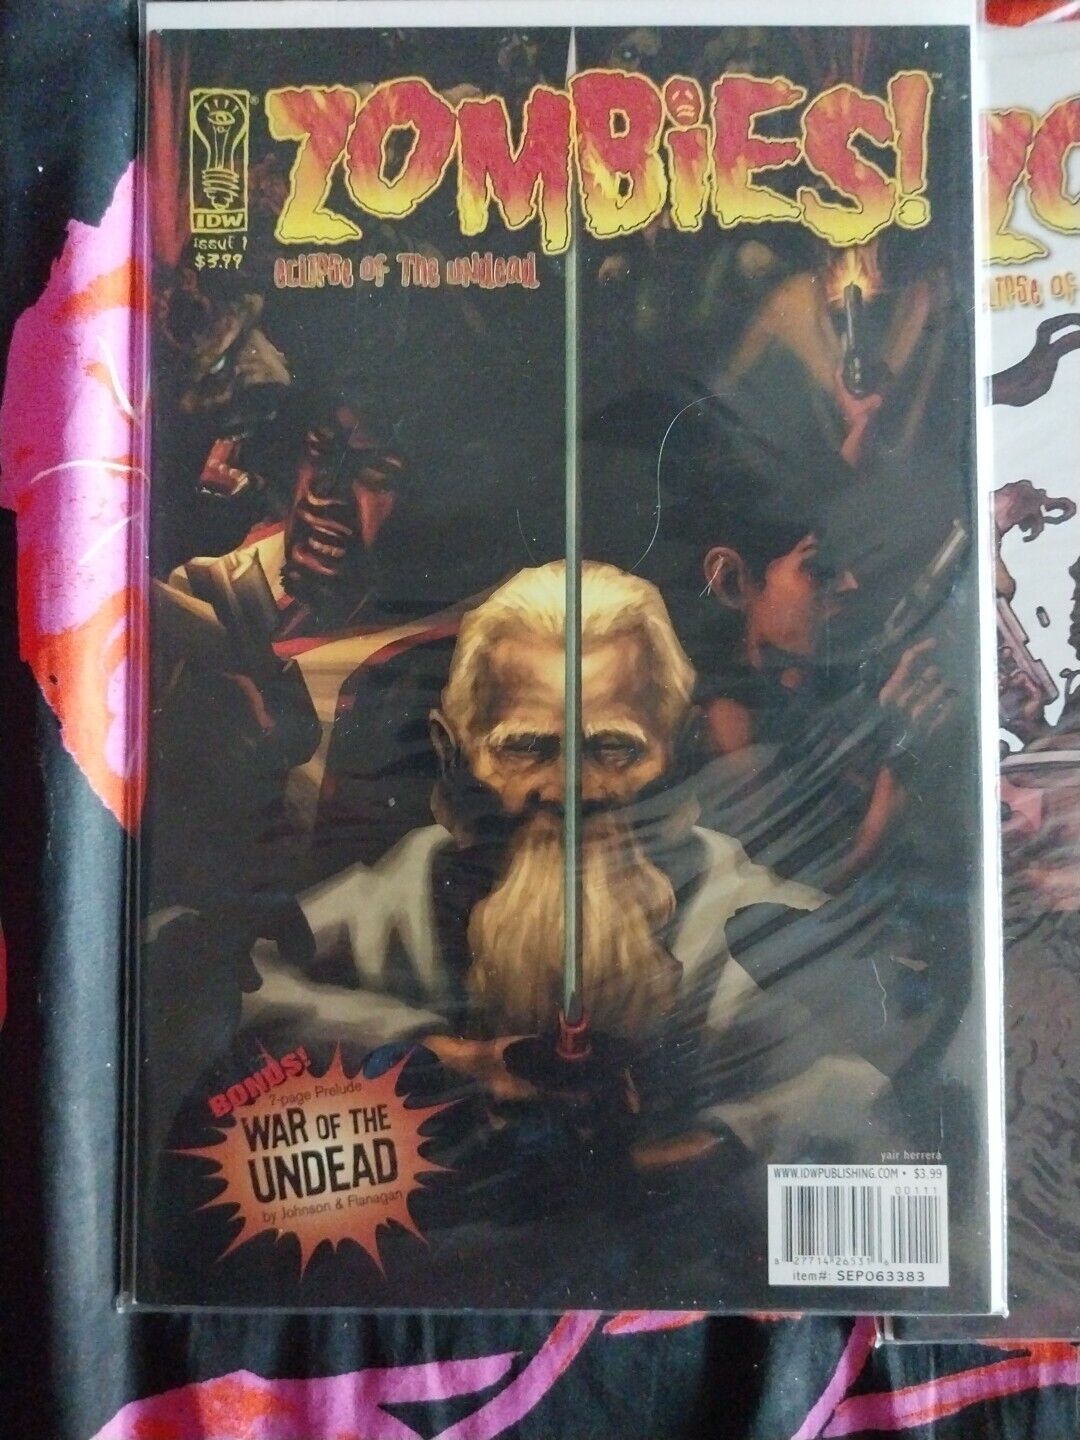 Zombies: Feast & Eclipse Of The Undead Mini Series 9 Comics VF-MT